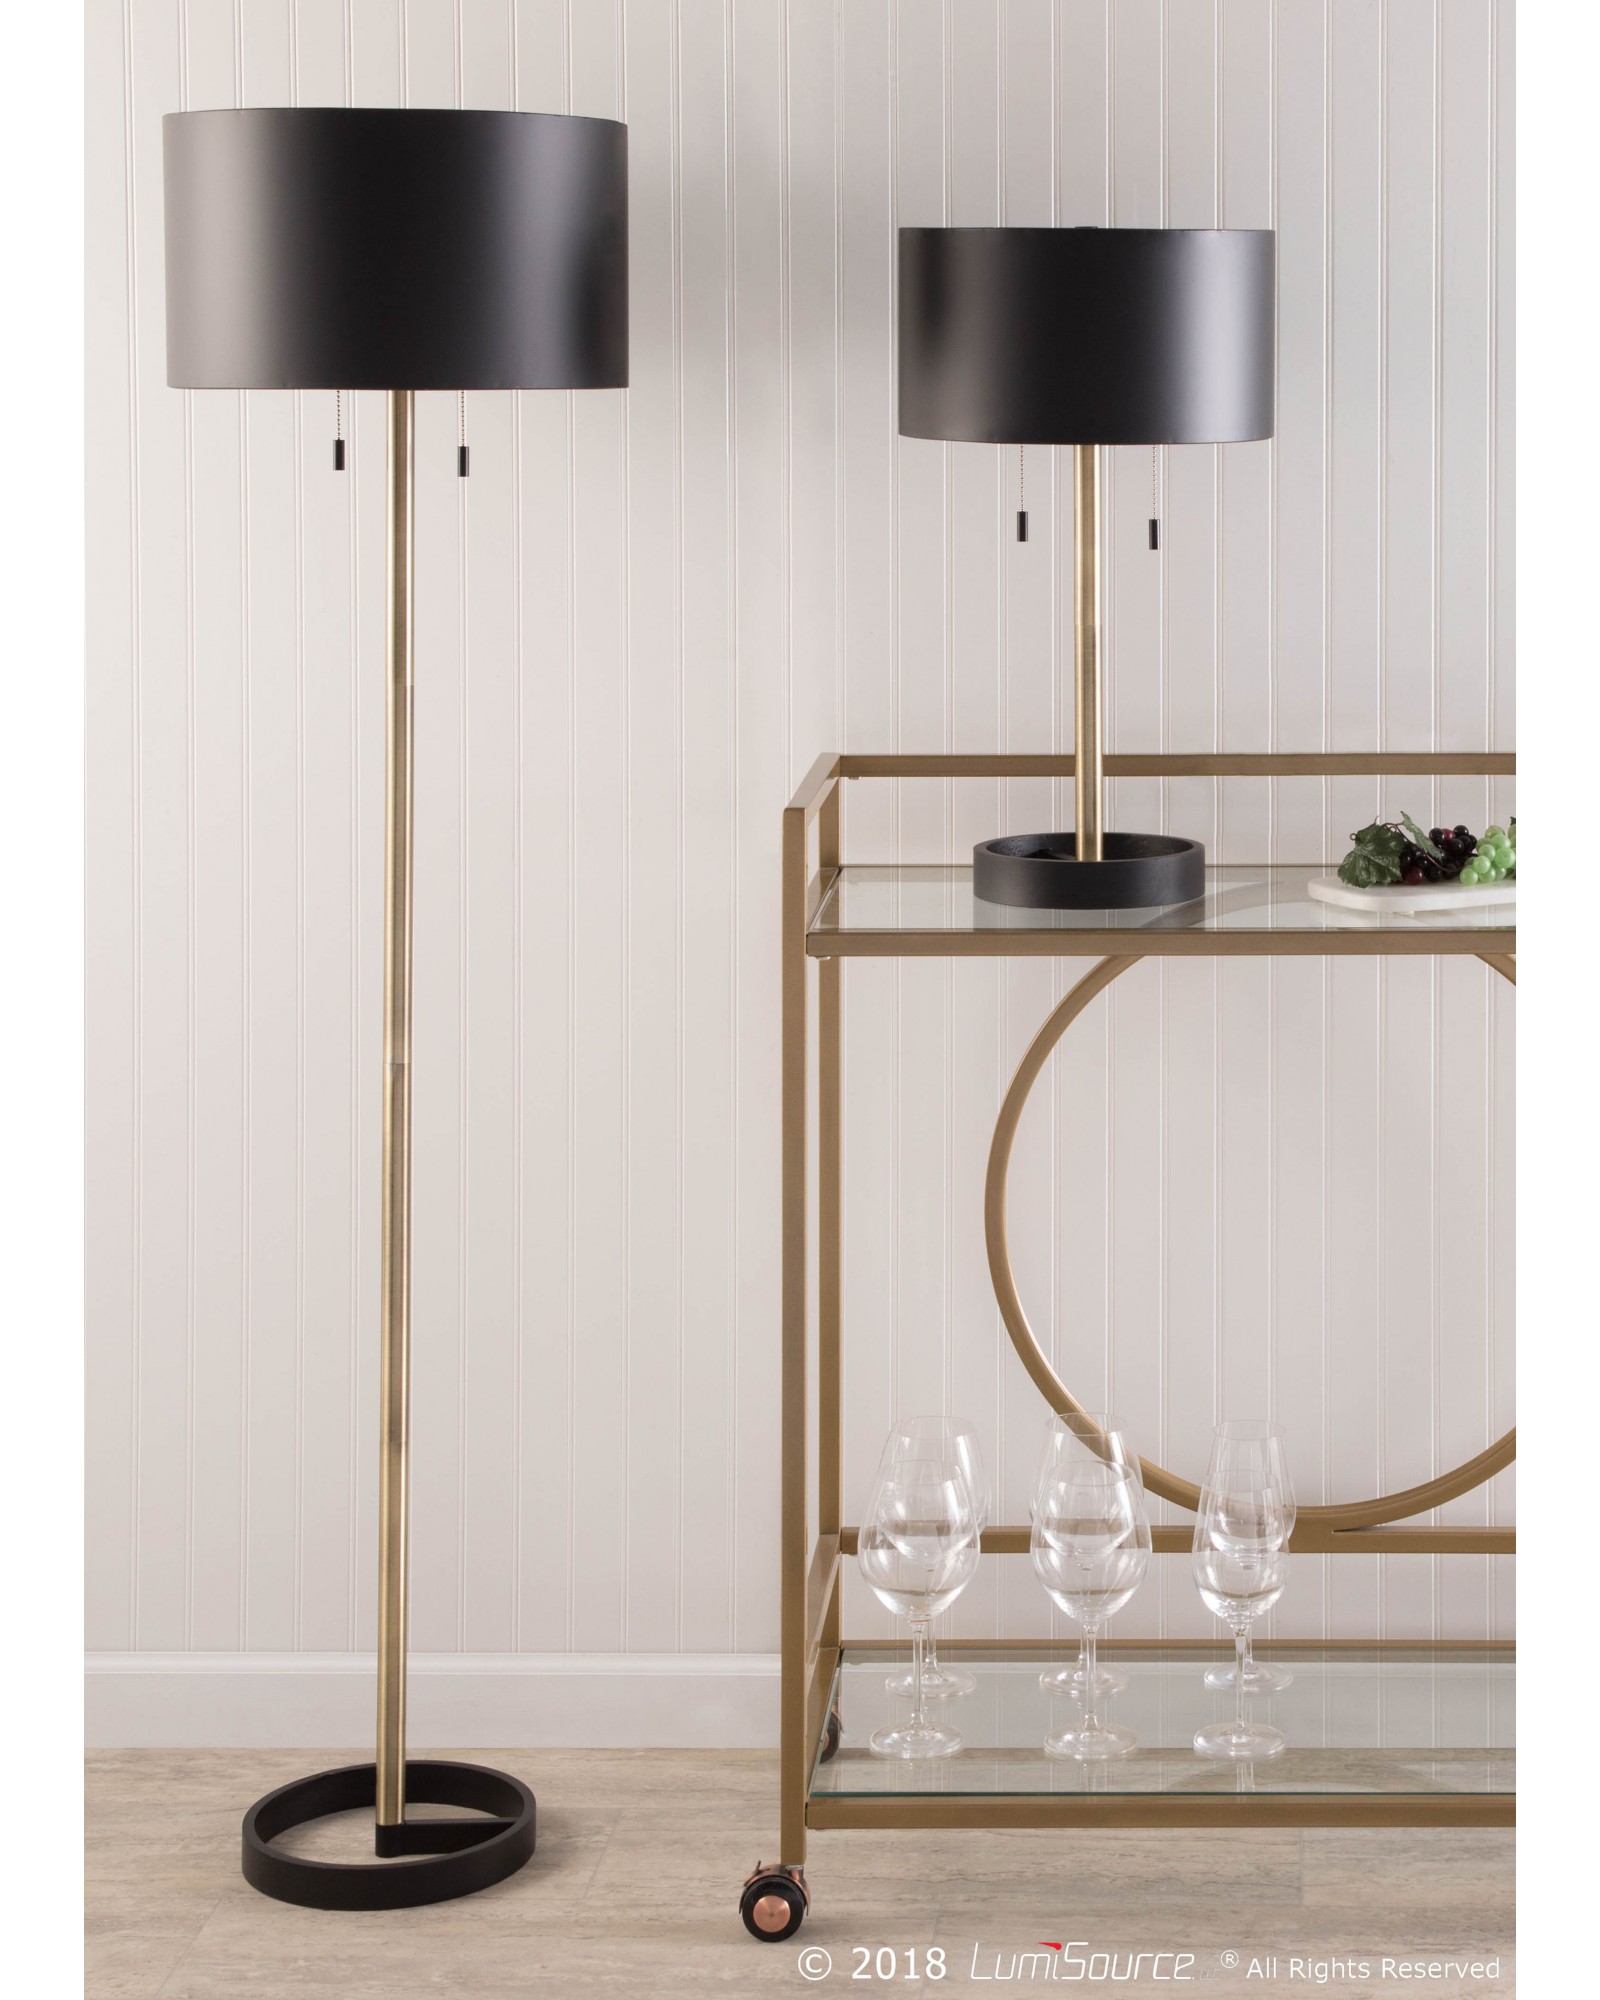 Hilton Contemporary Table Lamp in Black with Gold Accents